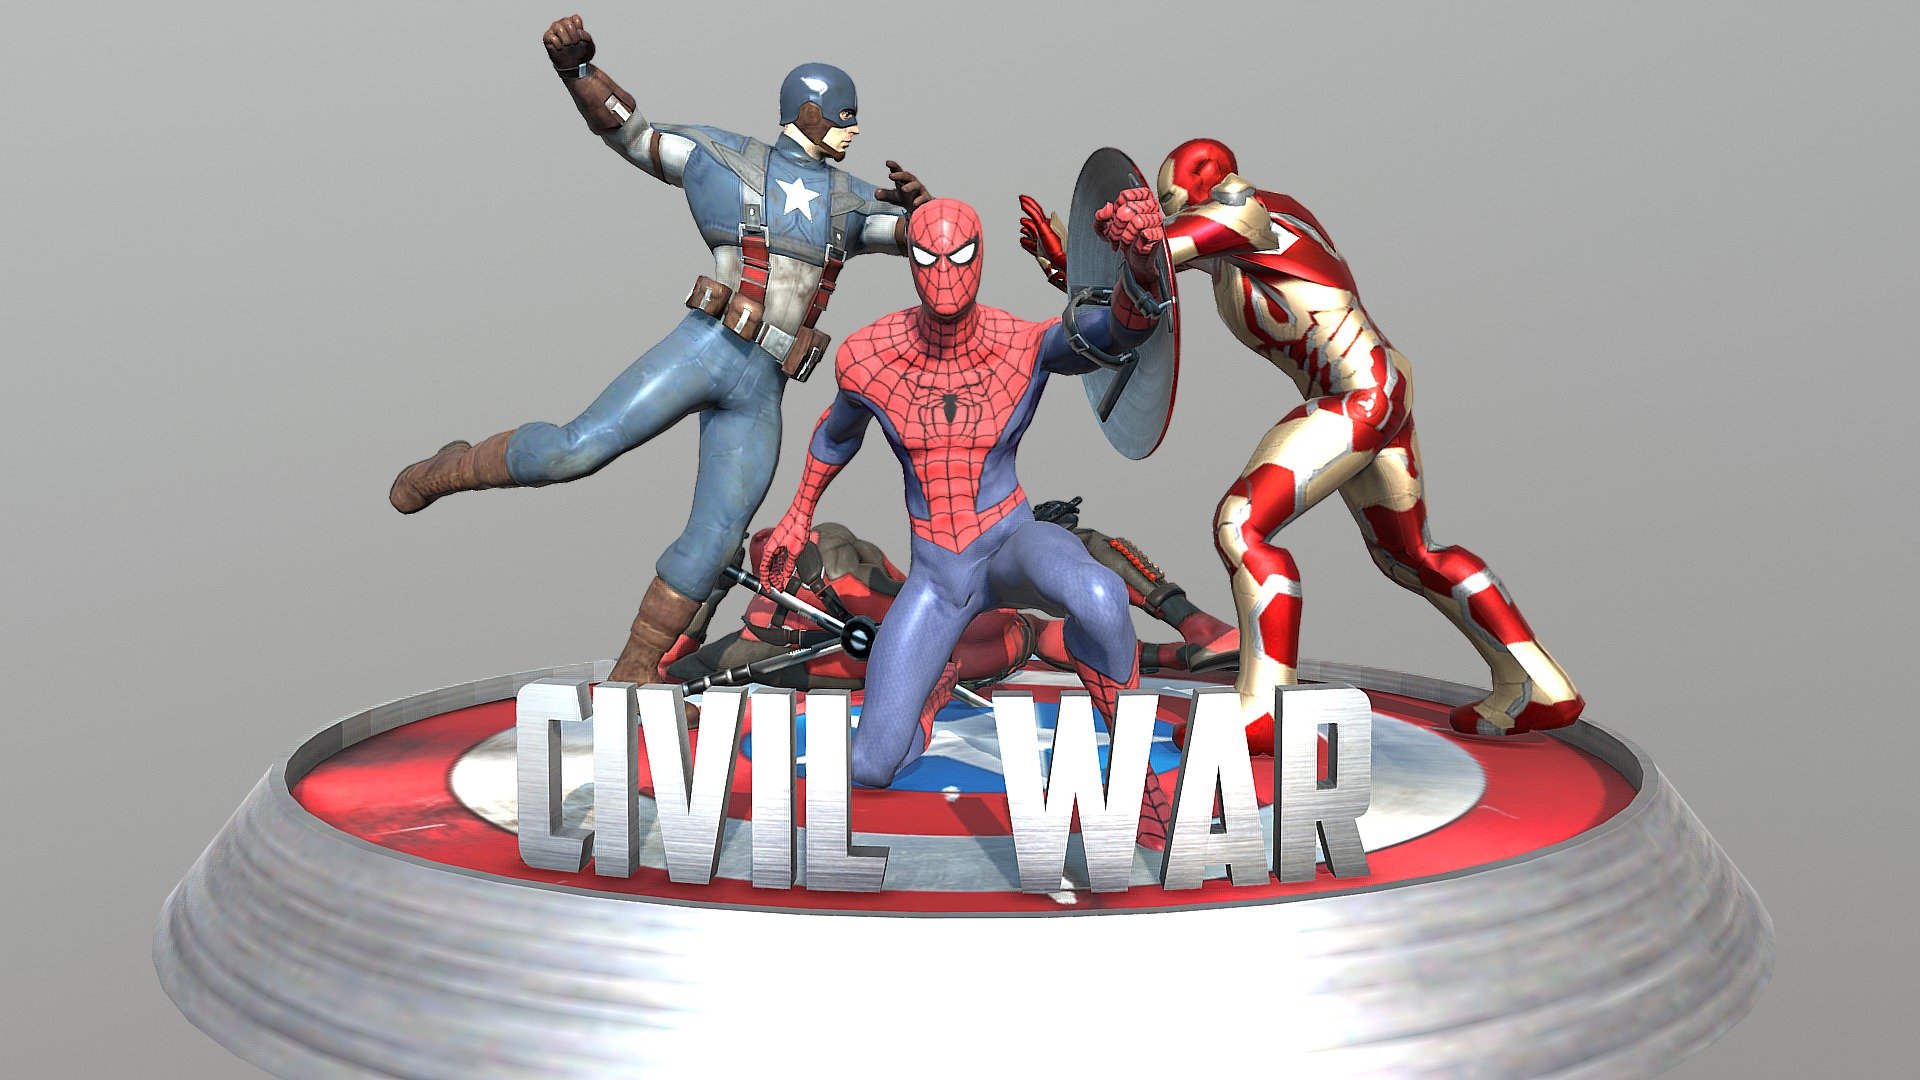 Captain America: Civil War download the new version for apple